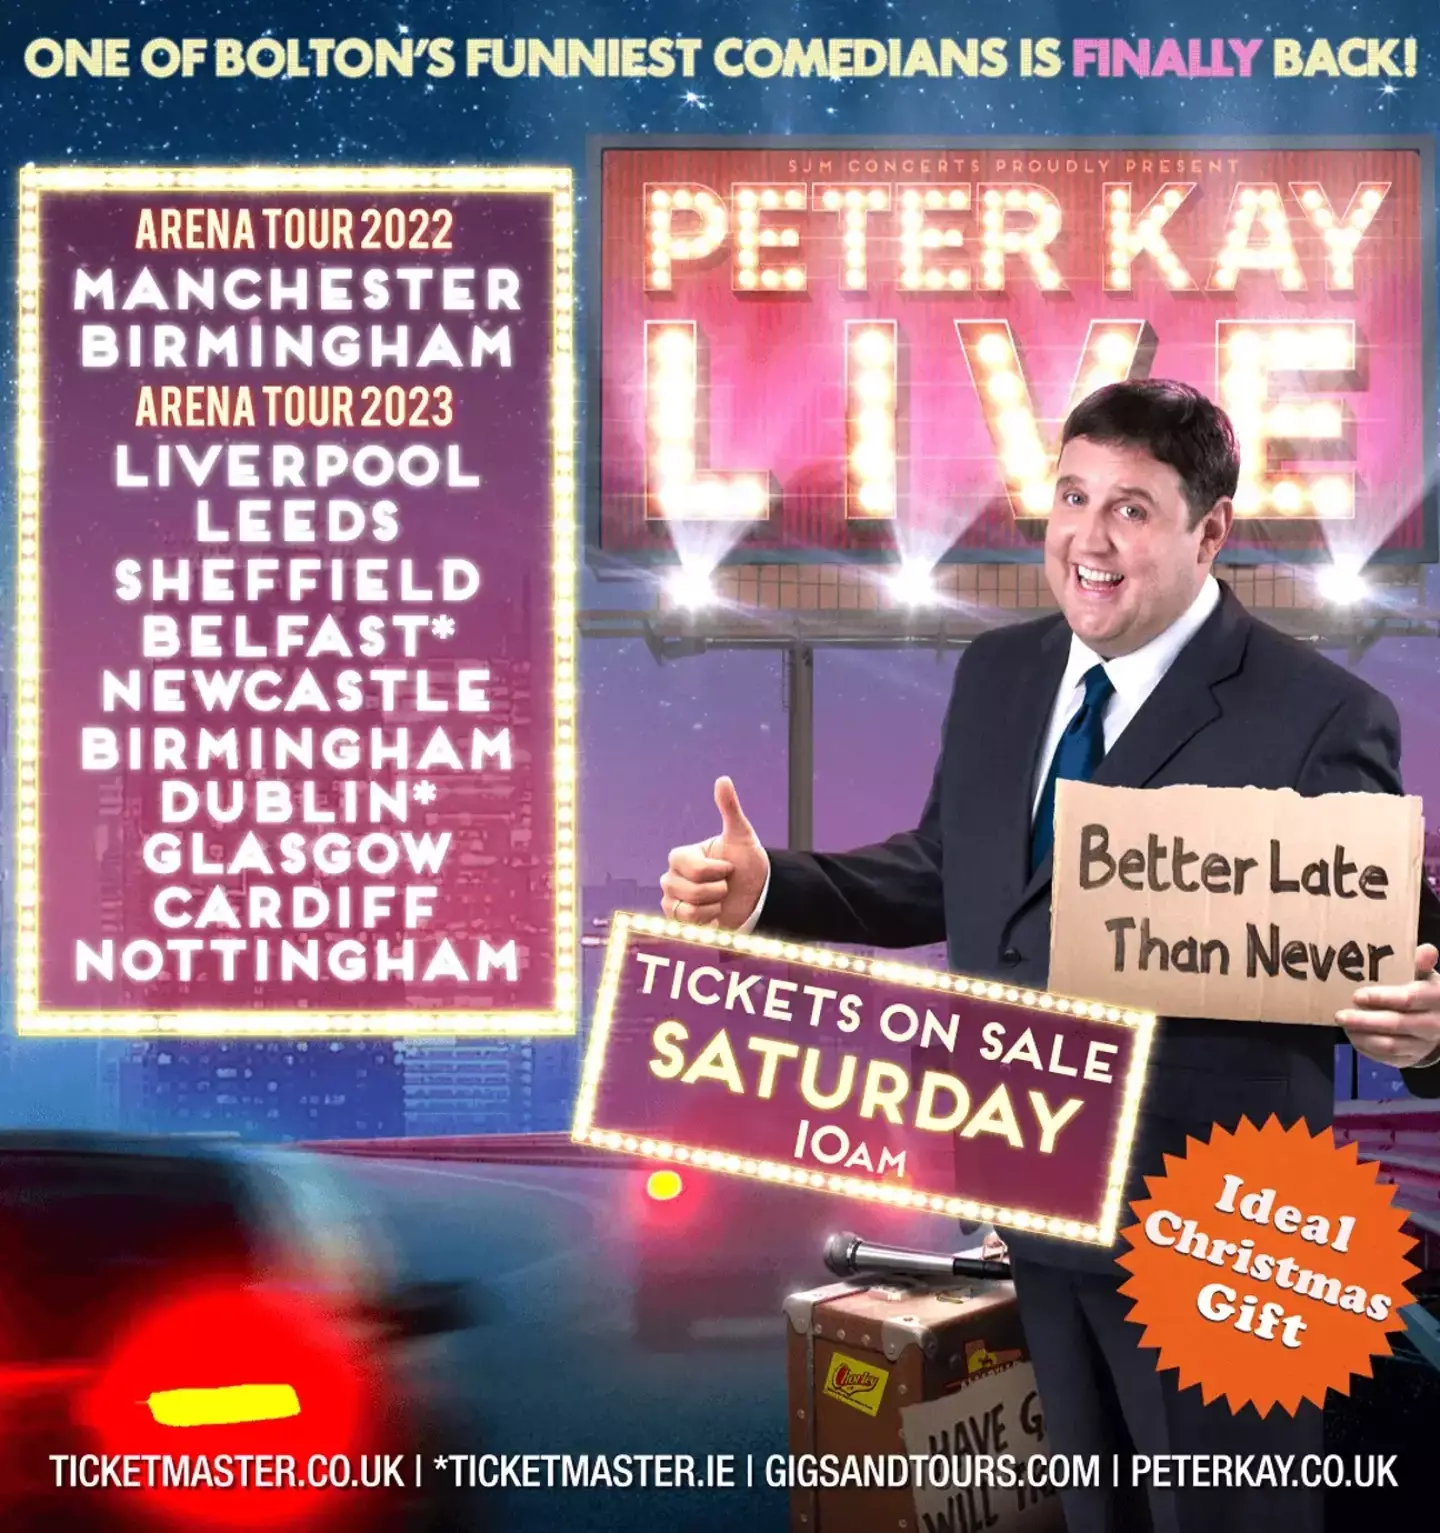 Peter Kay launched the general admission tickets for his tour today.